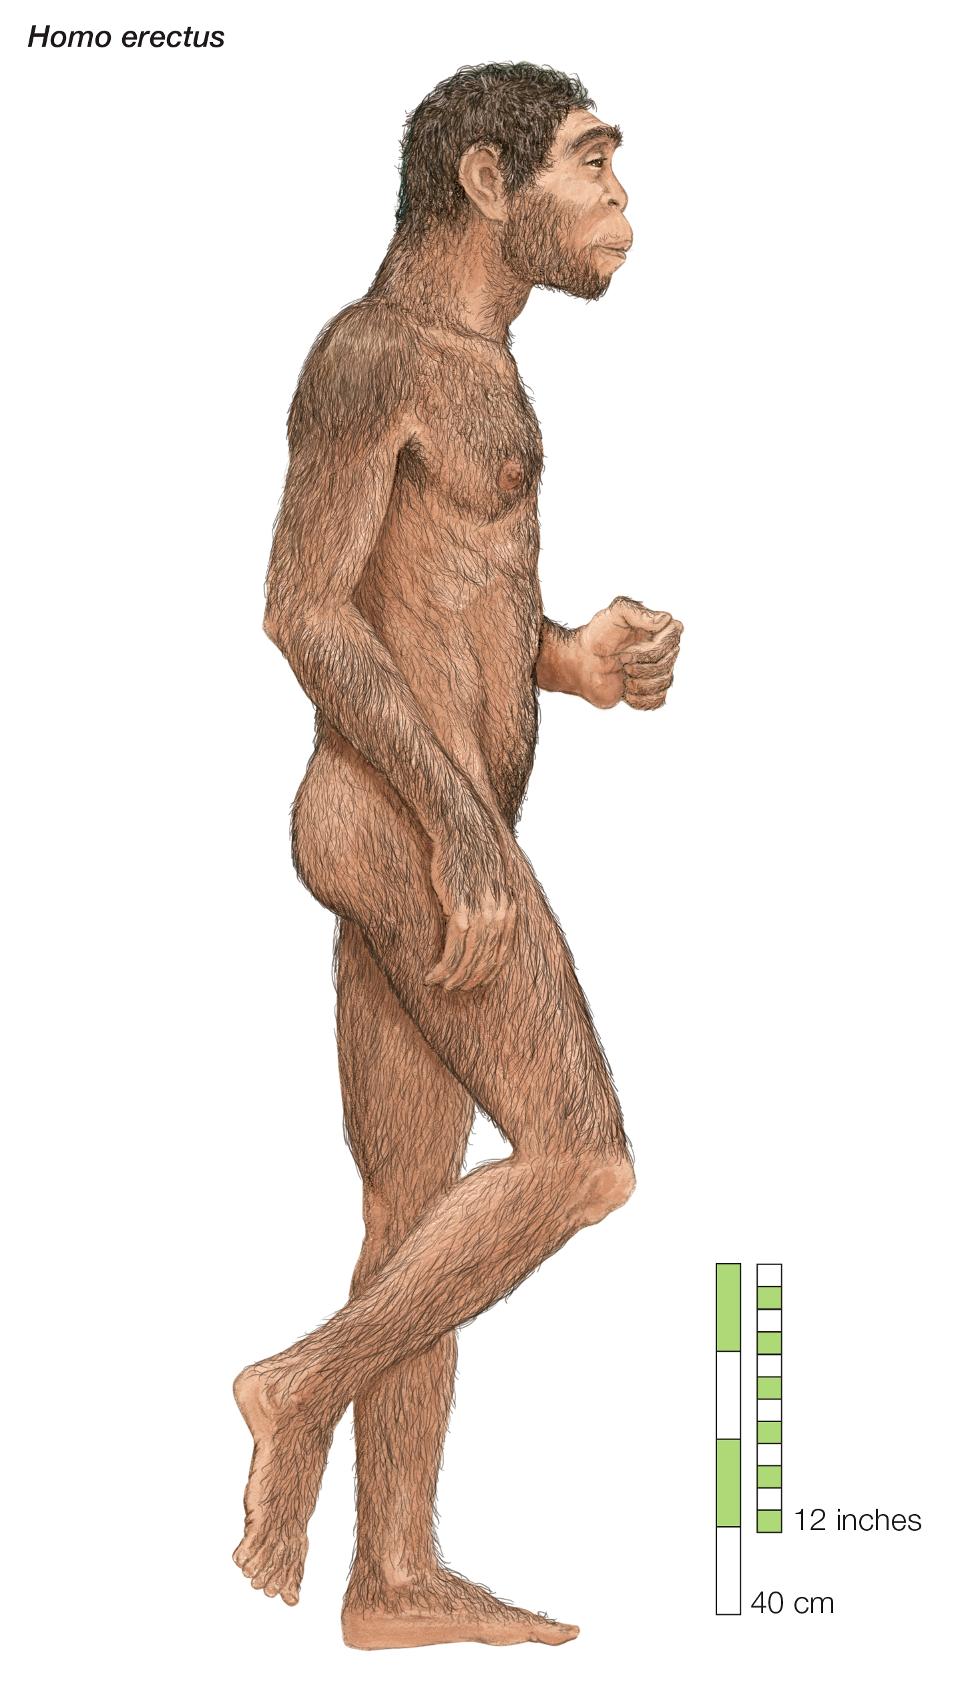 Homo Erectus, ″Upright Man,″ Which Lived From Approximately 1,700,000 To 200,000 Years Ago.